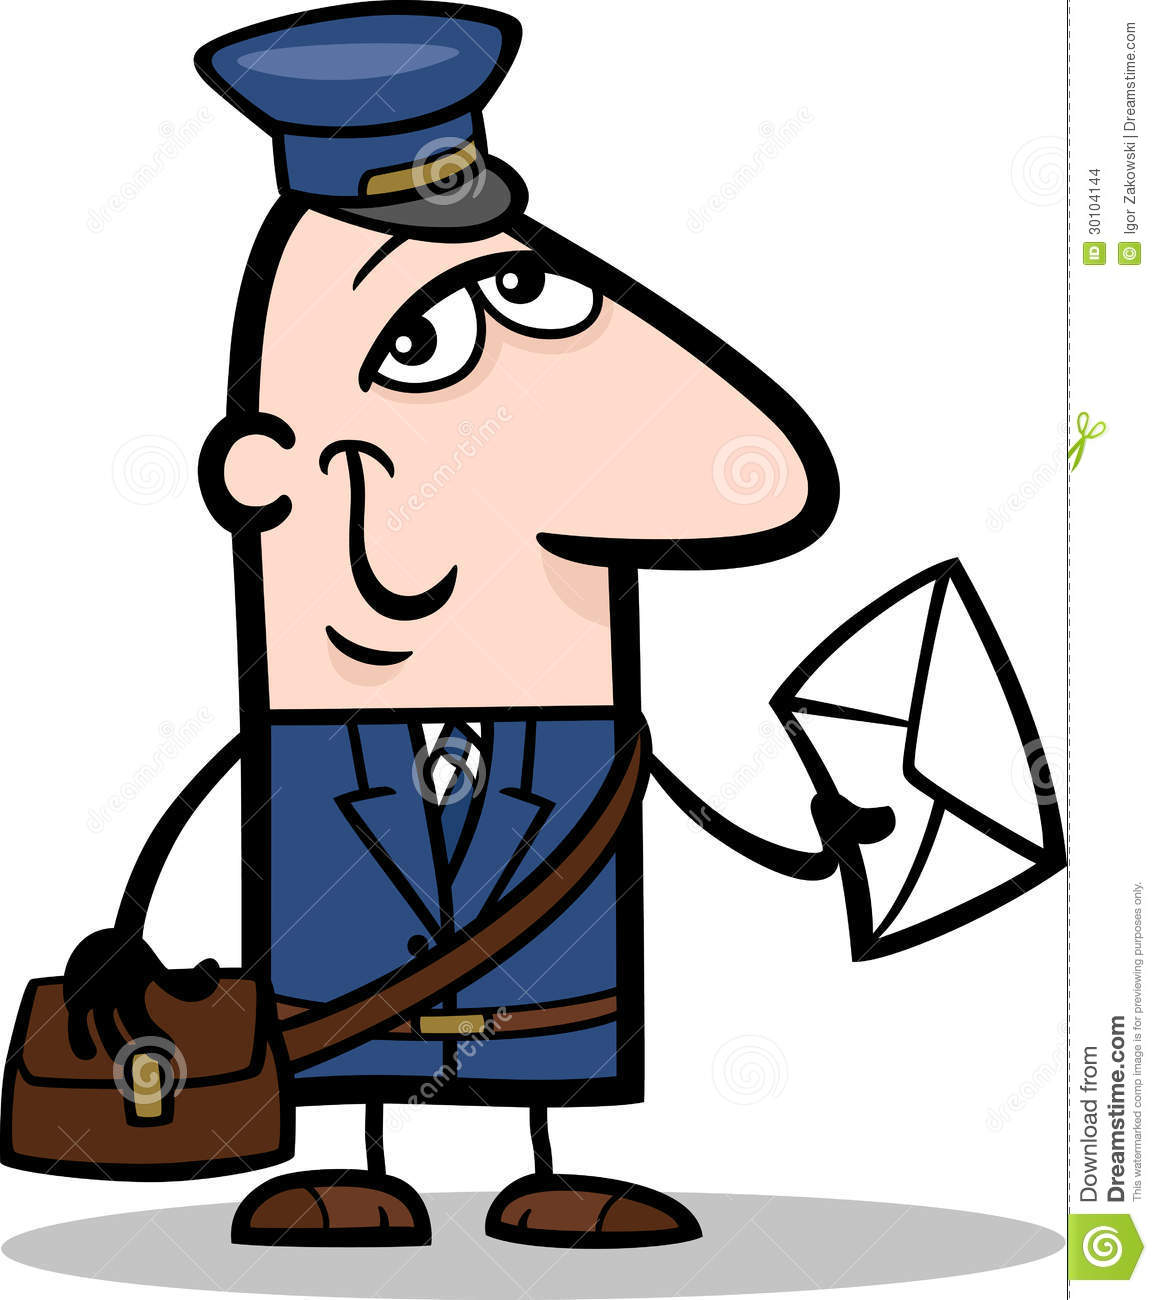 Postman With Letter Cartoon Illustration Stock Images   Image